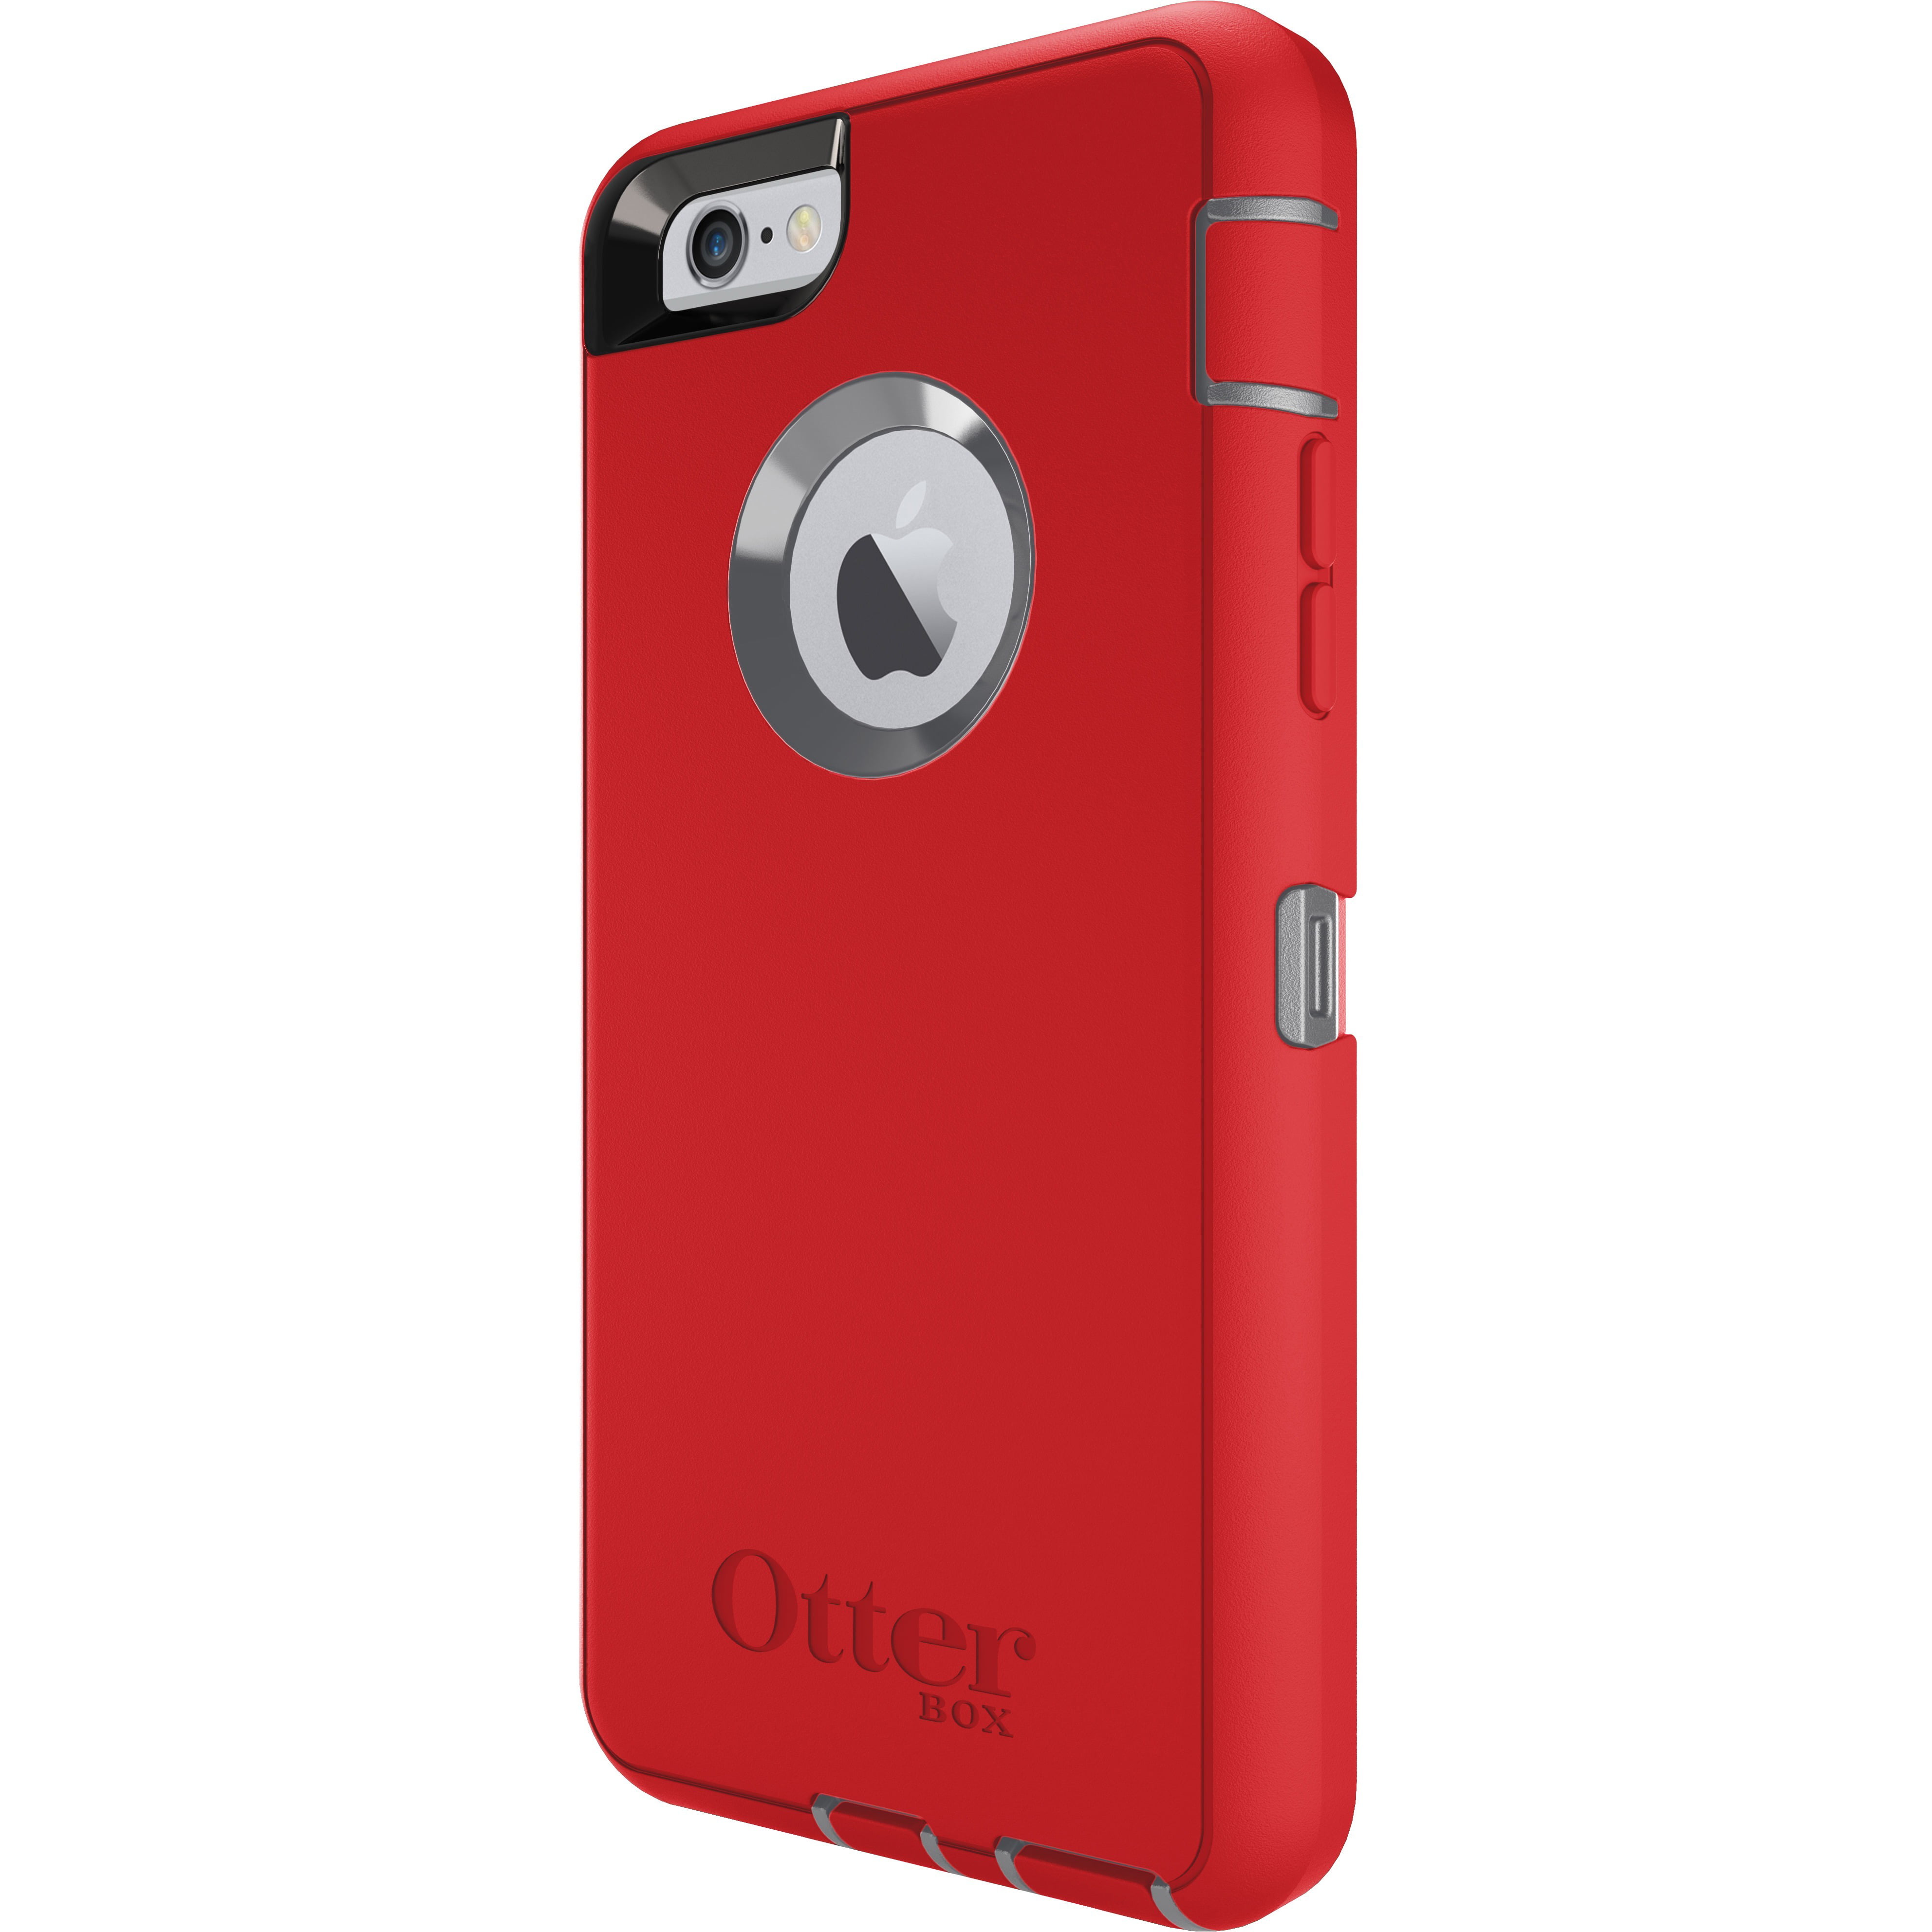 OtterBox Defender Series Case for iPhone 6/6s, Fire  Walmart.com